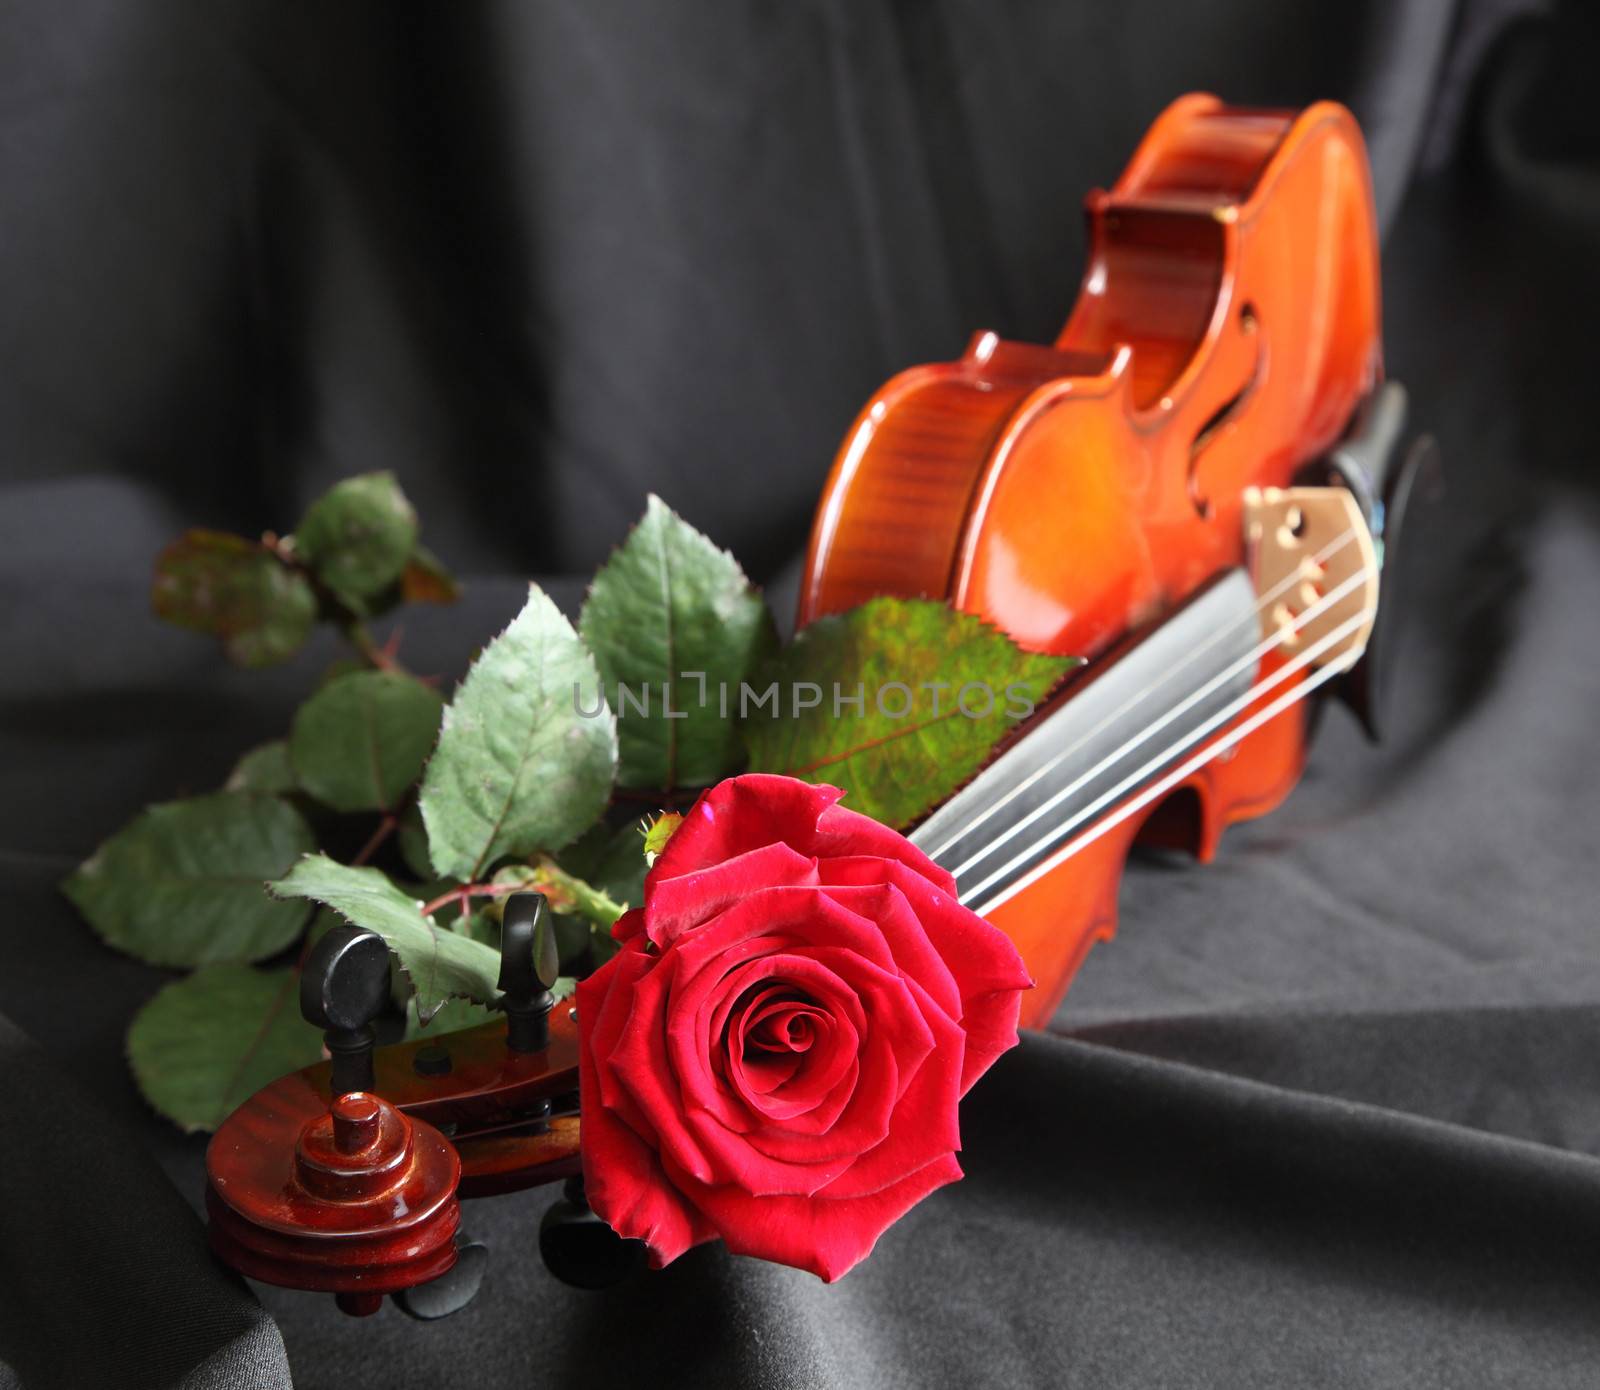 Violin with a red rose on a black background